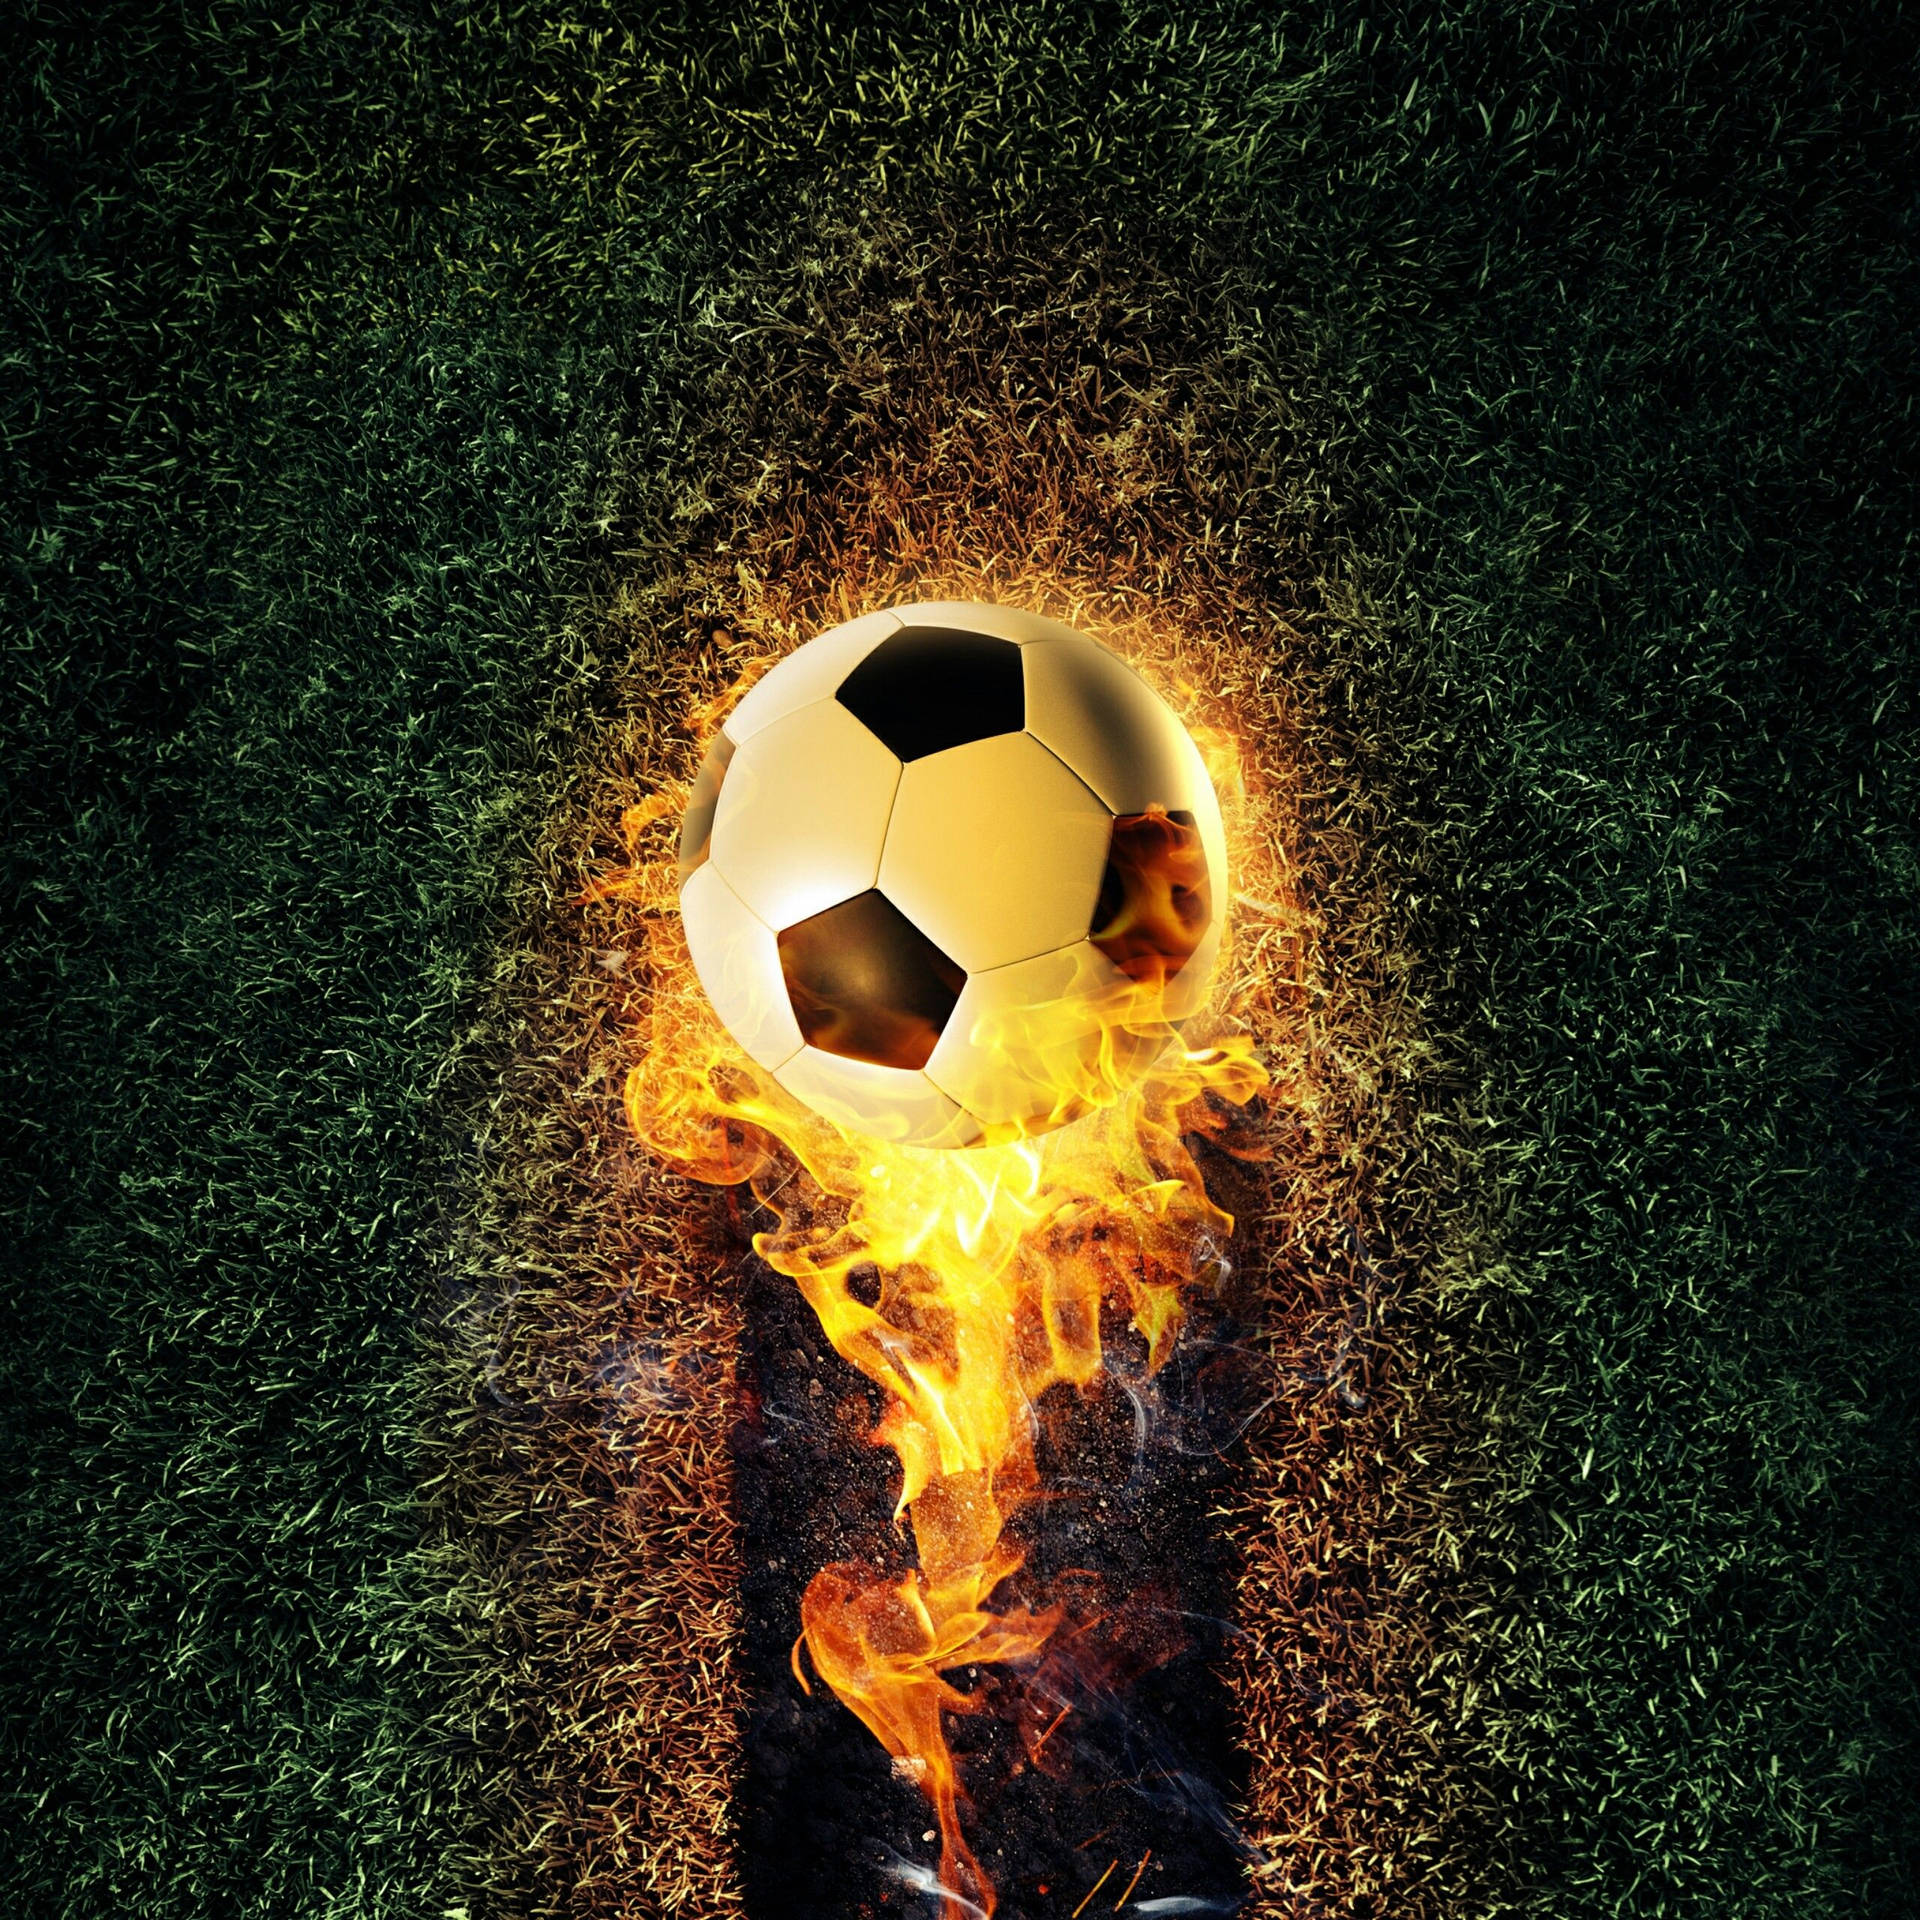 Soccer Ball On Fire Background